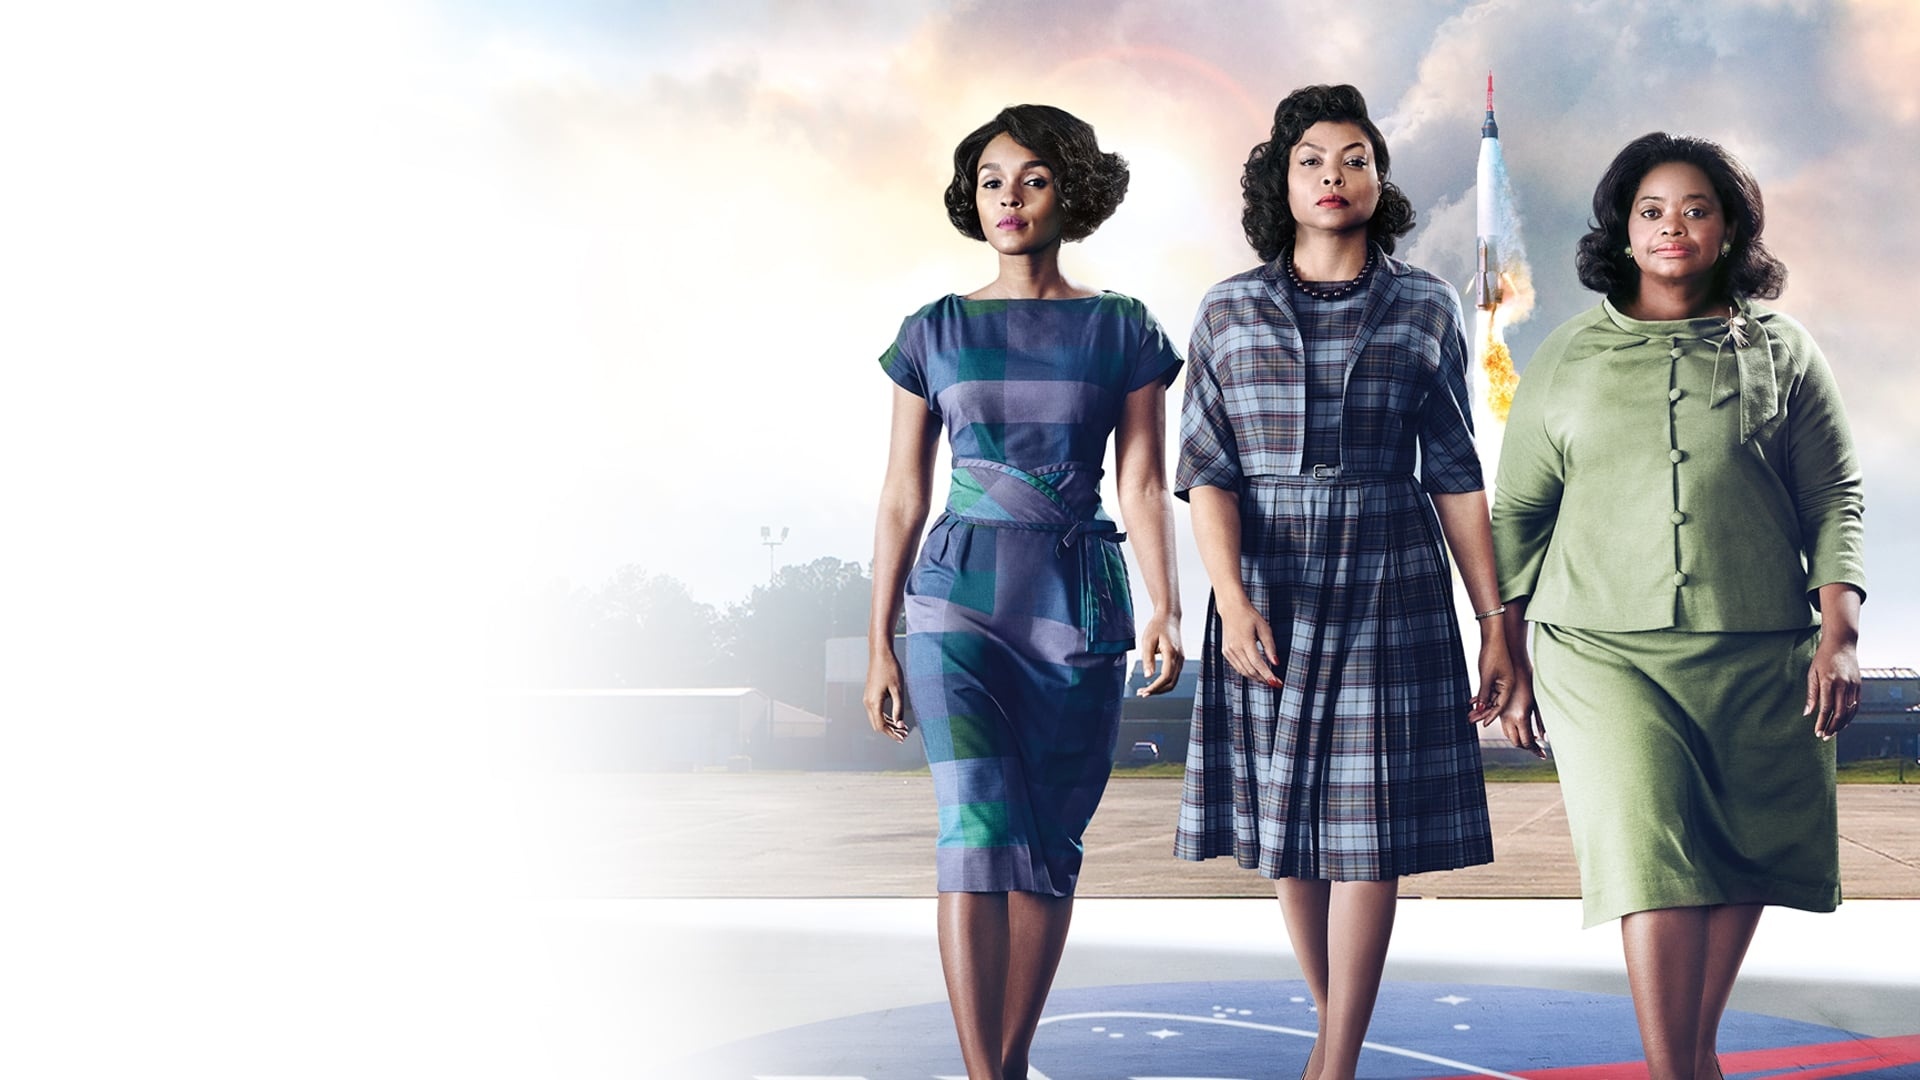 Hidden Figures: The film won the Screen Actors Guild Award for Outstanding Performance by a Cast in a Motion Picture. 1920x1080 Full HD Wallpaper.